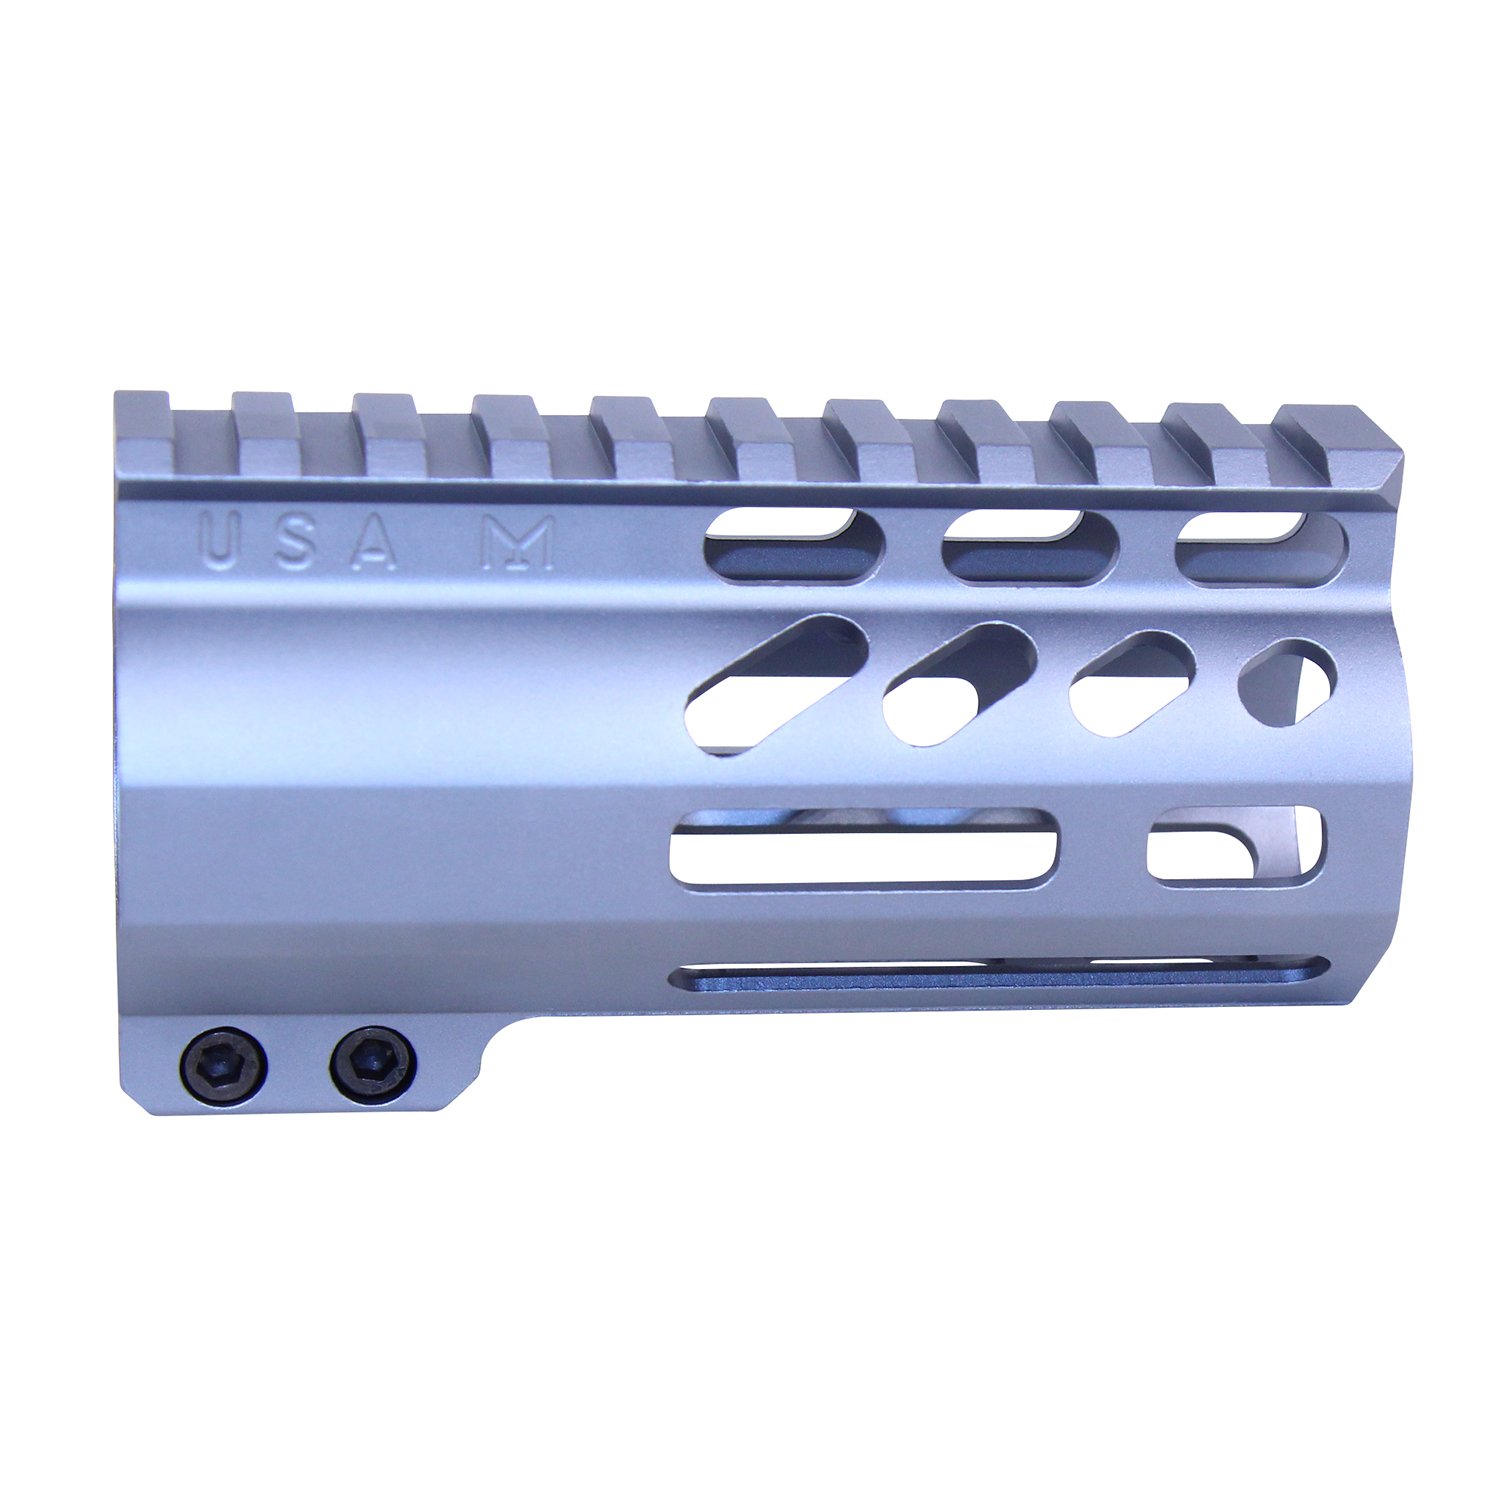 4" AIR-LOK Series M-LOK Compression Free Floating Handguard With Monolithic Top Rail (Anodized Grey)